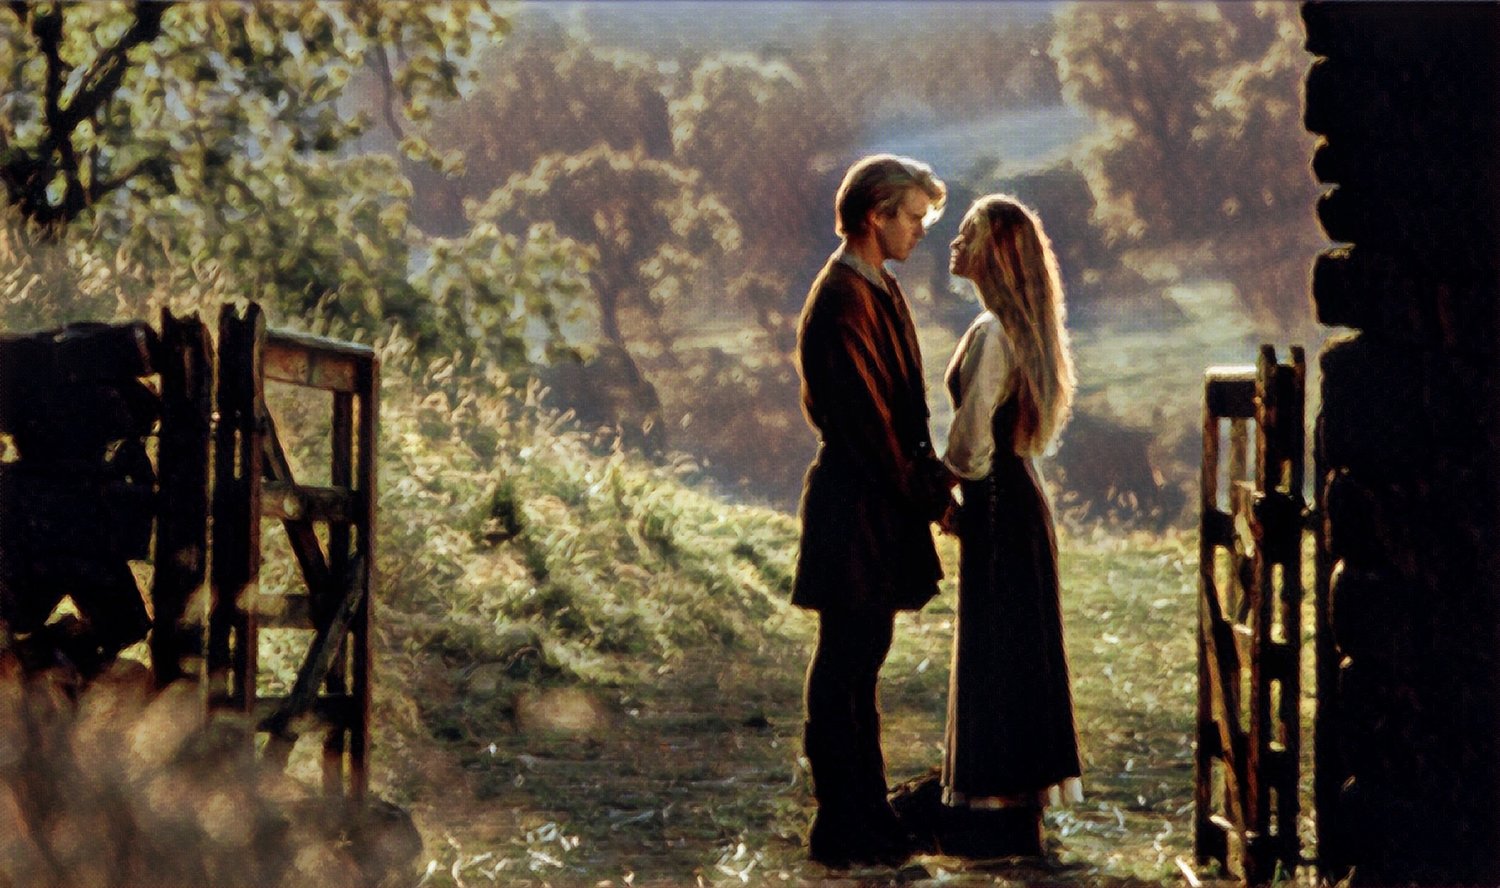 The Princess Bride, minutes 48 to 50